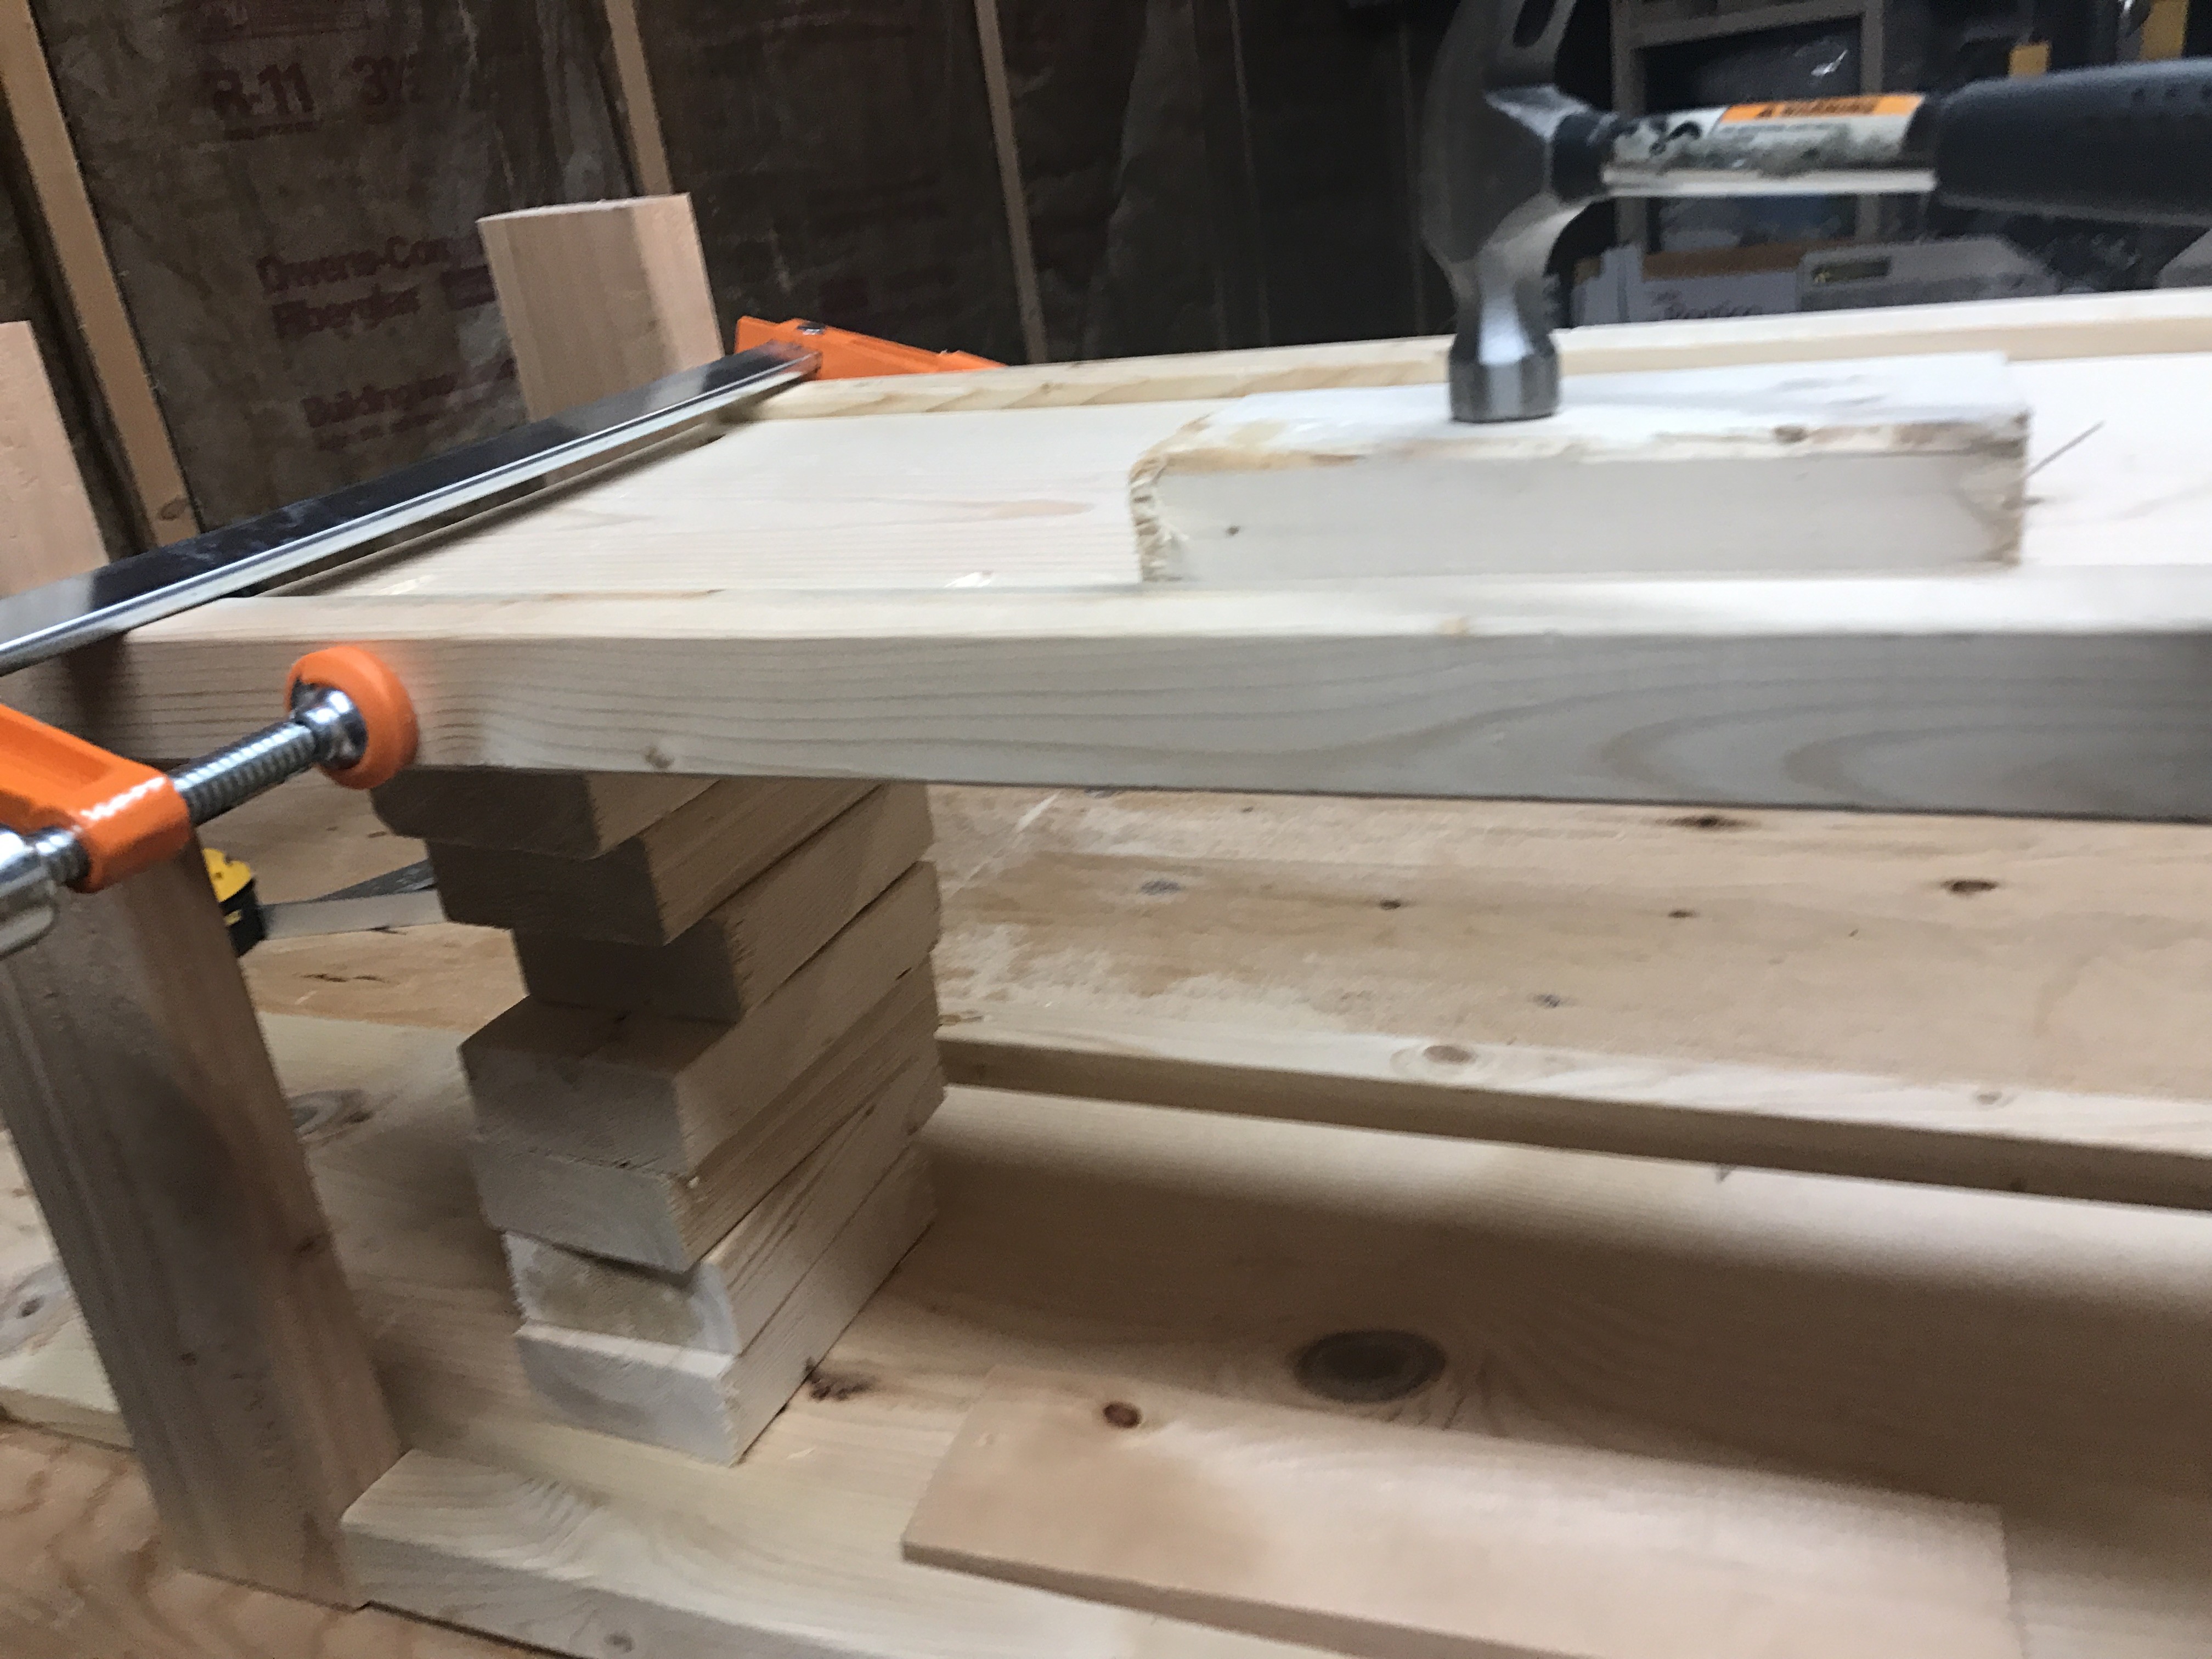 hammer on scrap wood to level out shelf